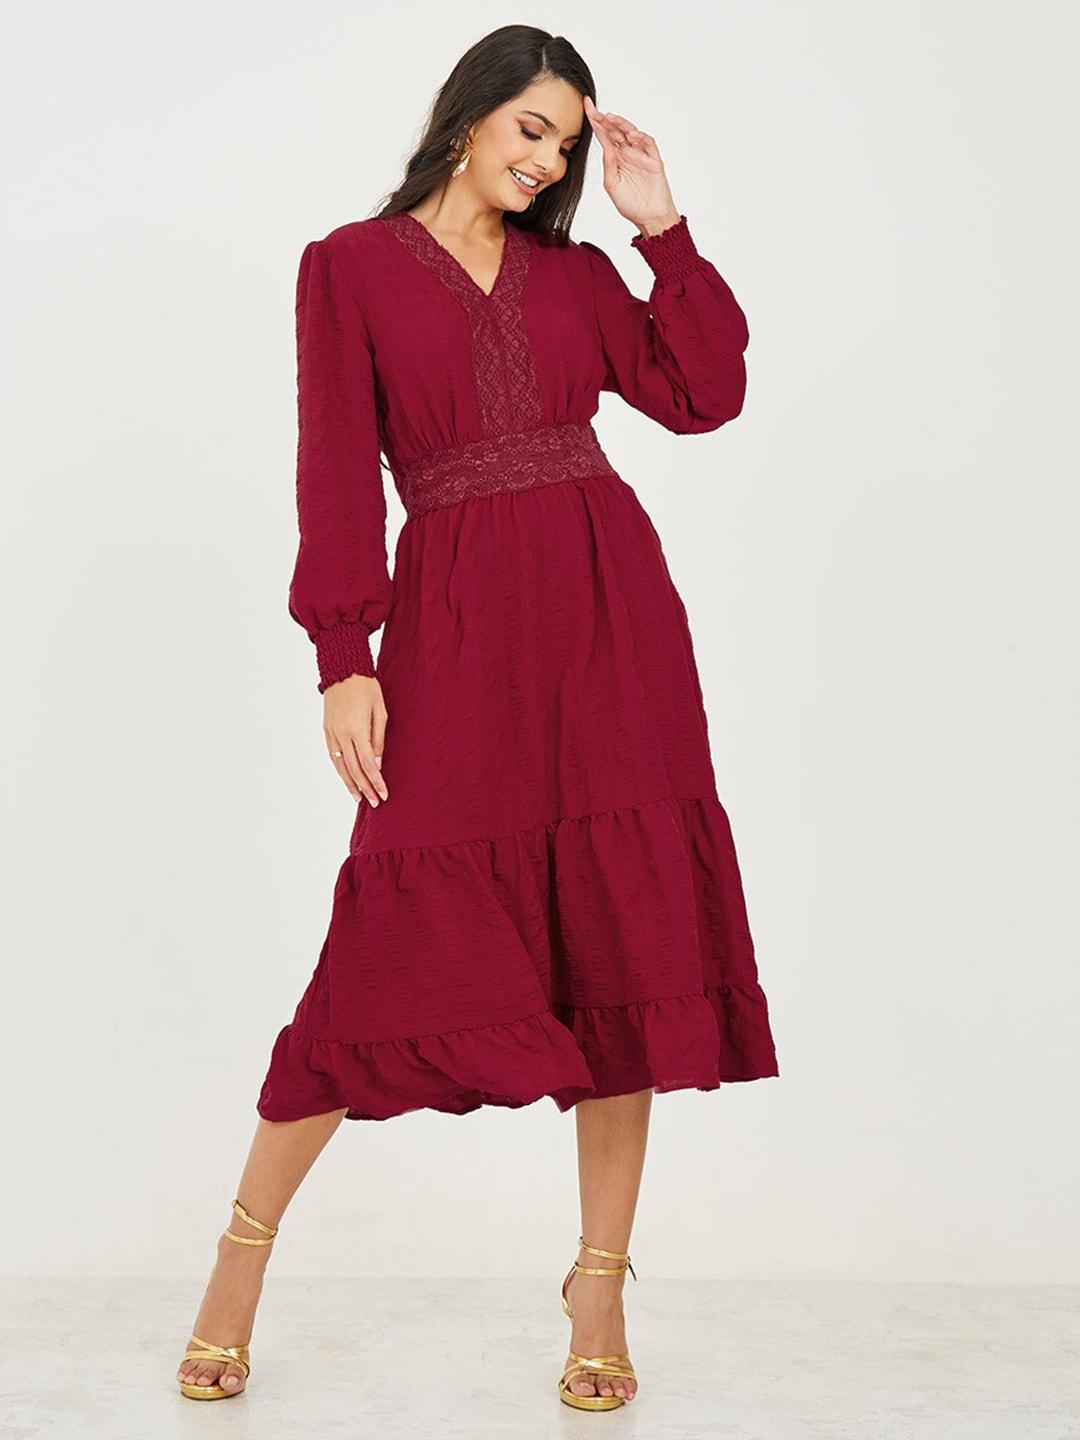 styli-v-neck-puff-sleeves-tiered-lace-inserts-fit-&-flare-dress